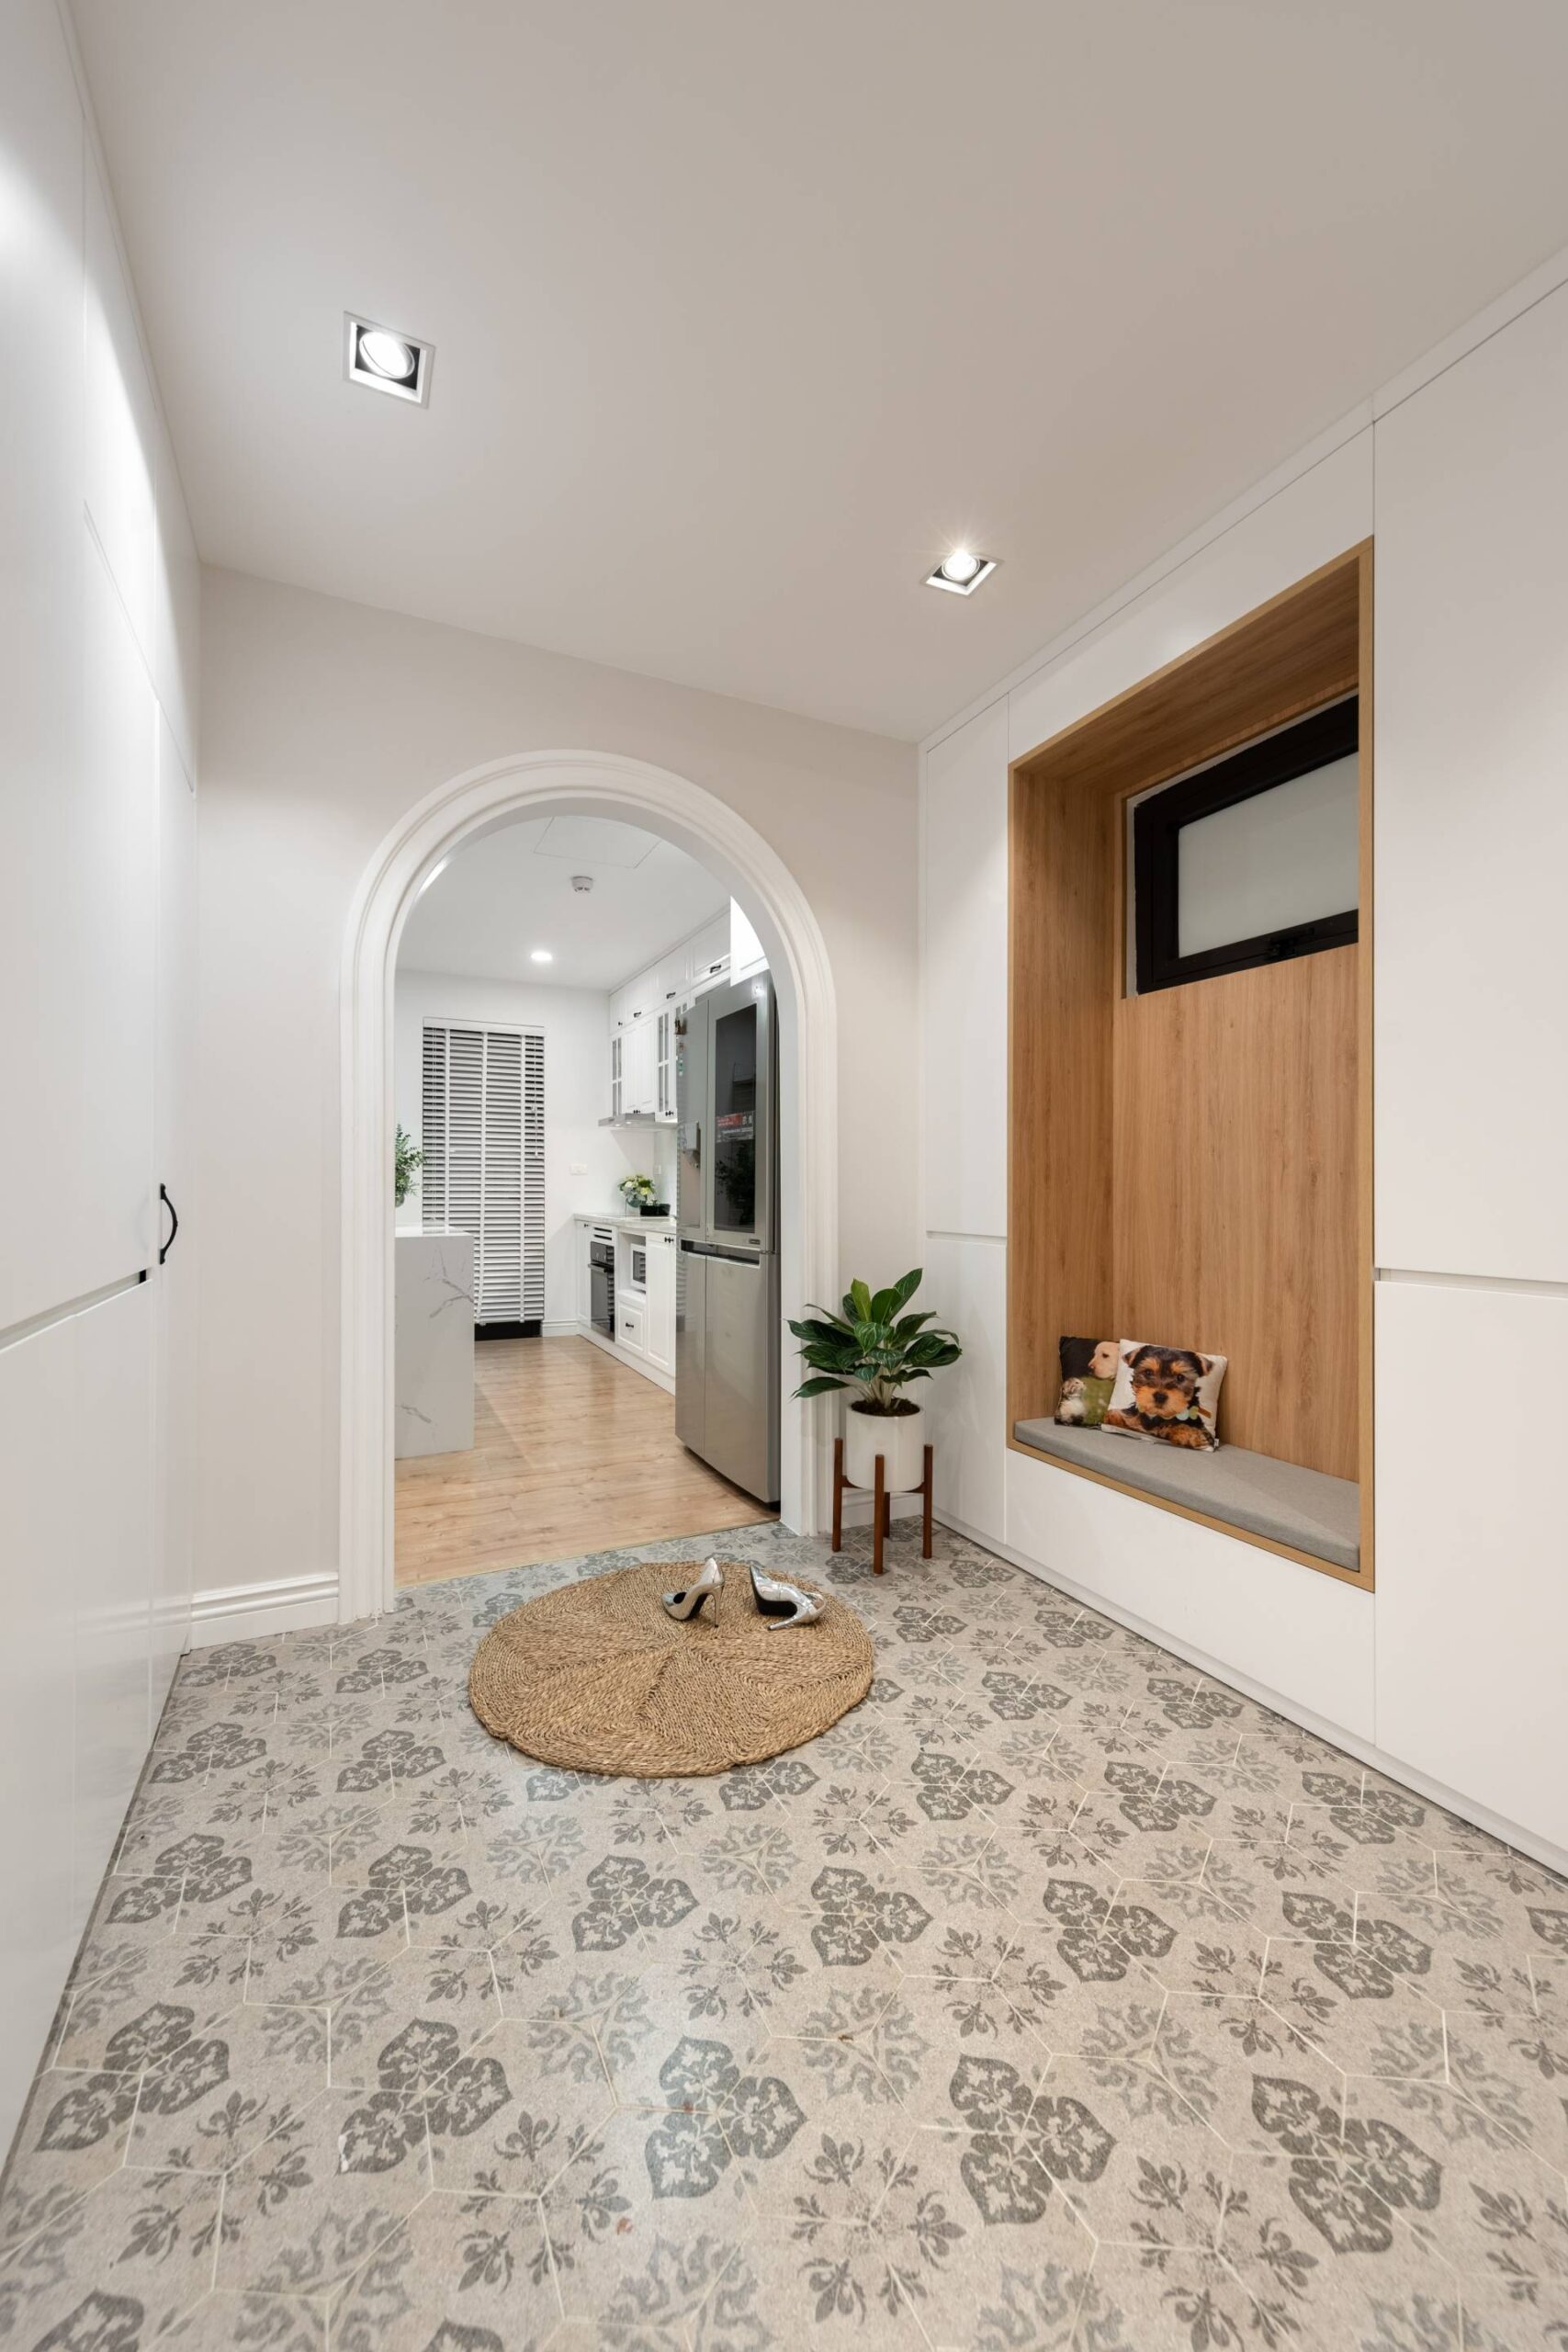 Arched door design is soft as a buffer before leading into the indoor space.